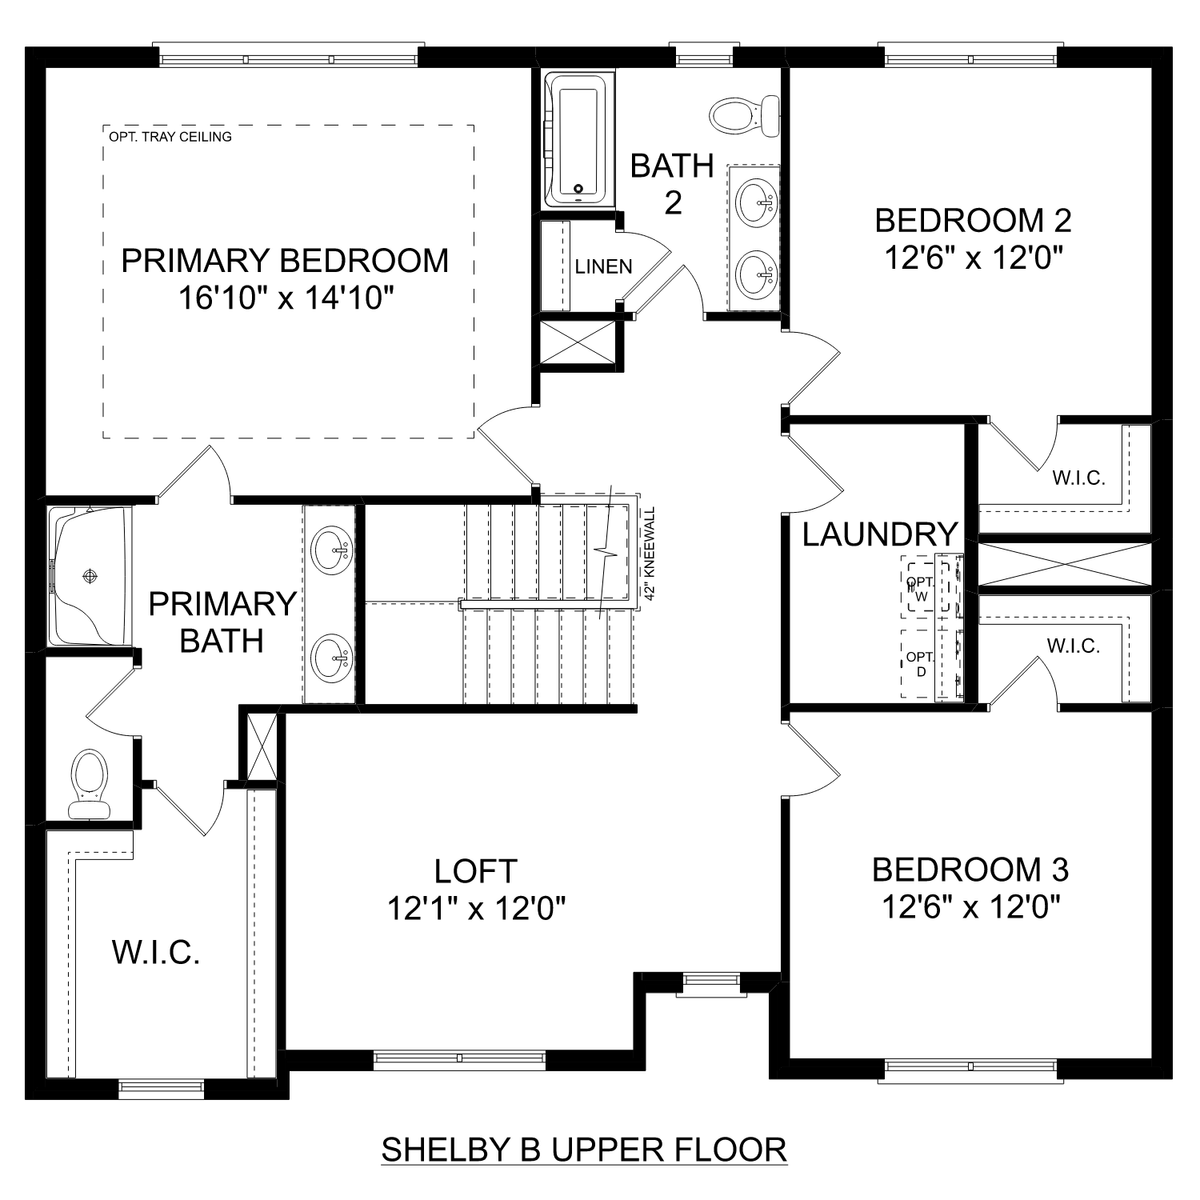 2 - The Shelby B floor plan layout for 26658 Kyle Lane in Davidson Homes' Ricketts Farm community.